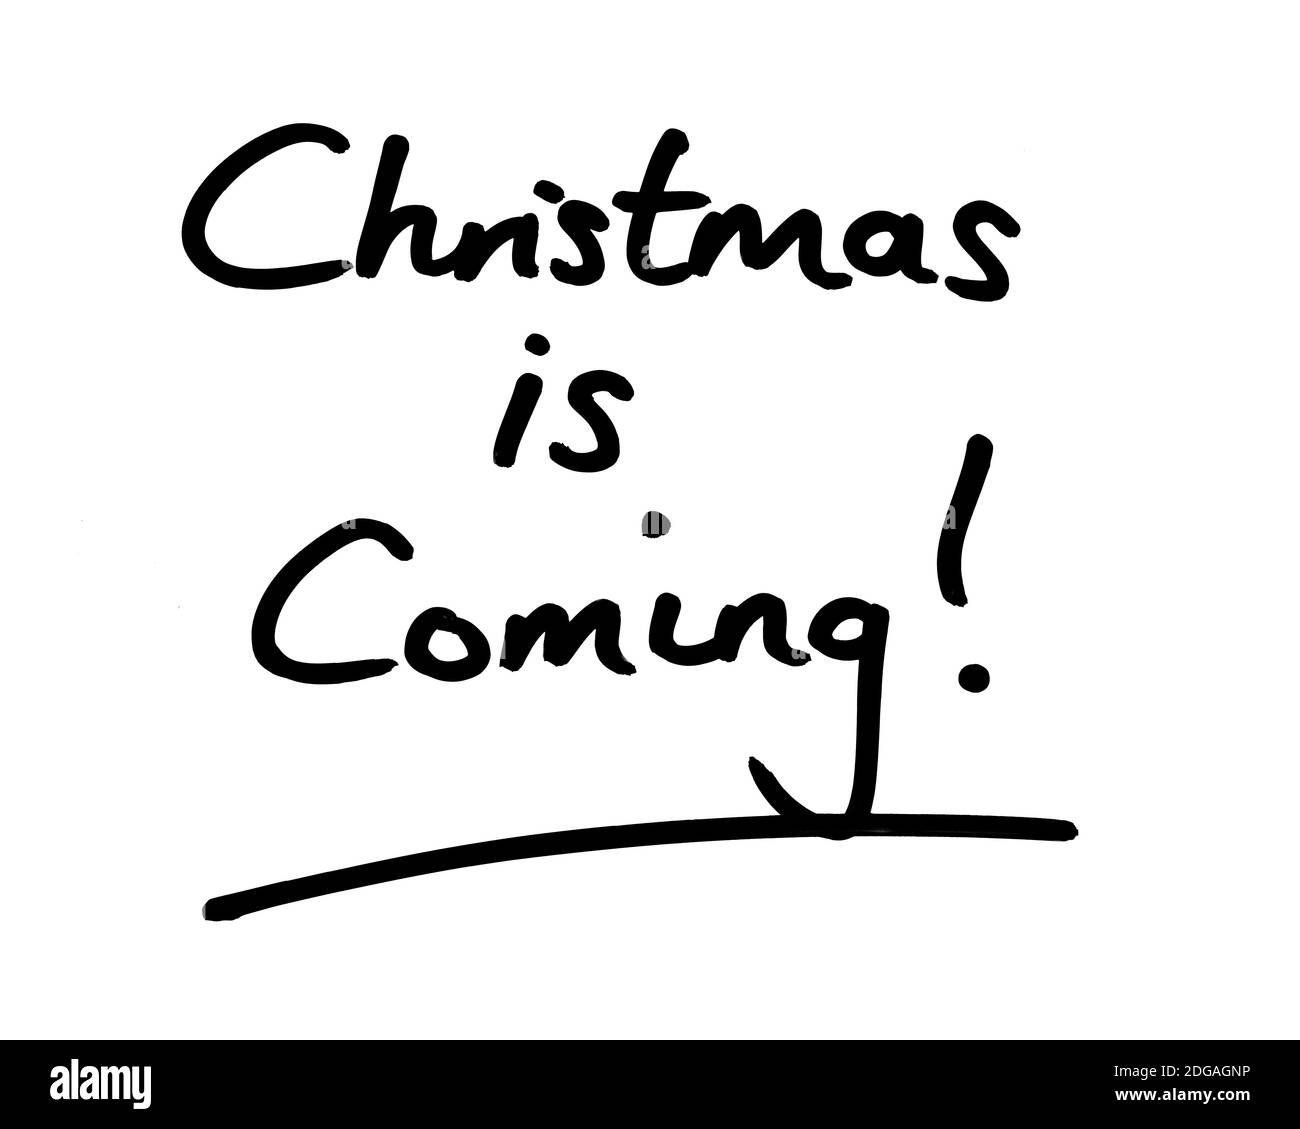 Christmas is Coming! handwritten on a white background. Stock Photo